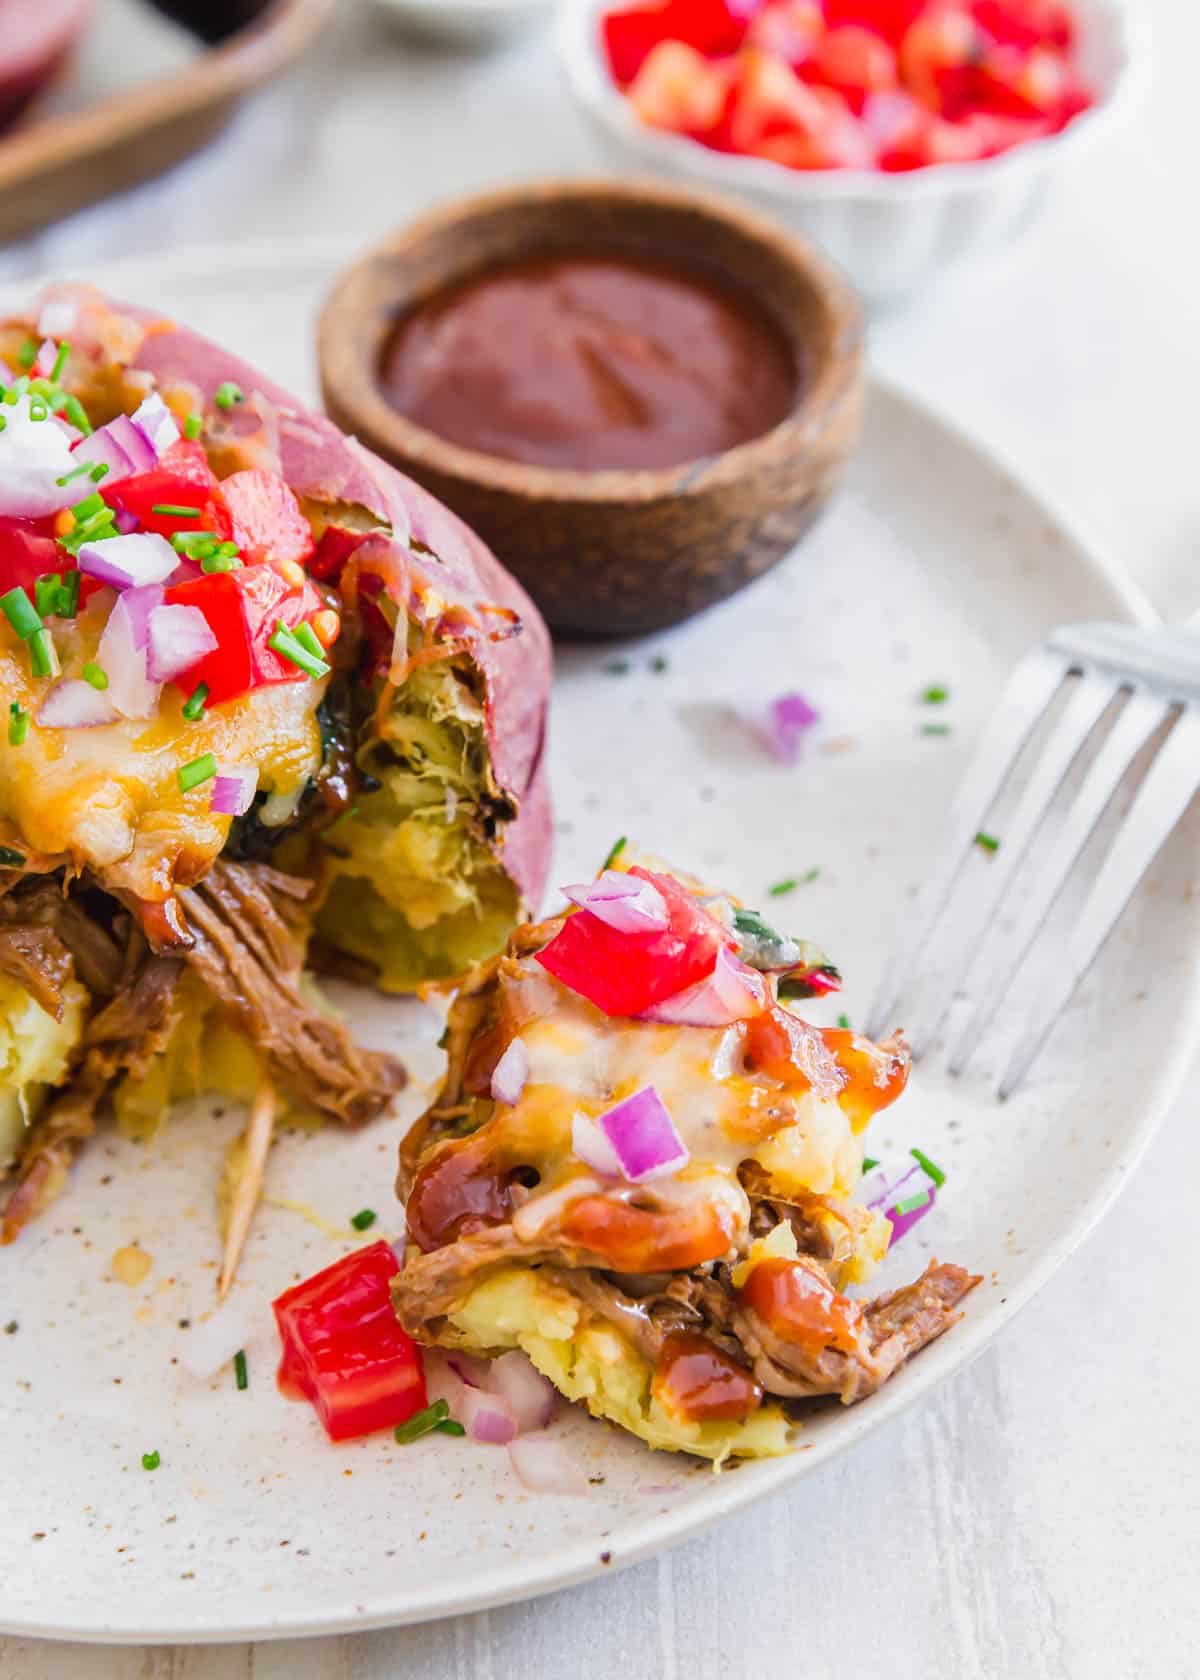 Loaded brisket baked potatoes served with BBQ sauce make an easy and delicious way to make a meal out of a baked potato!